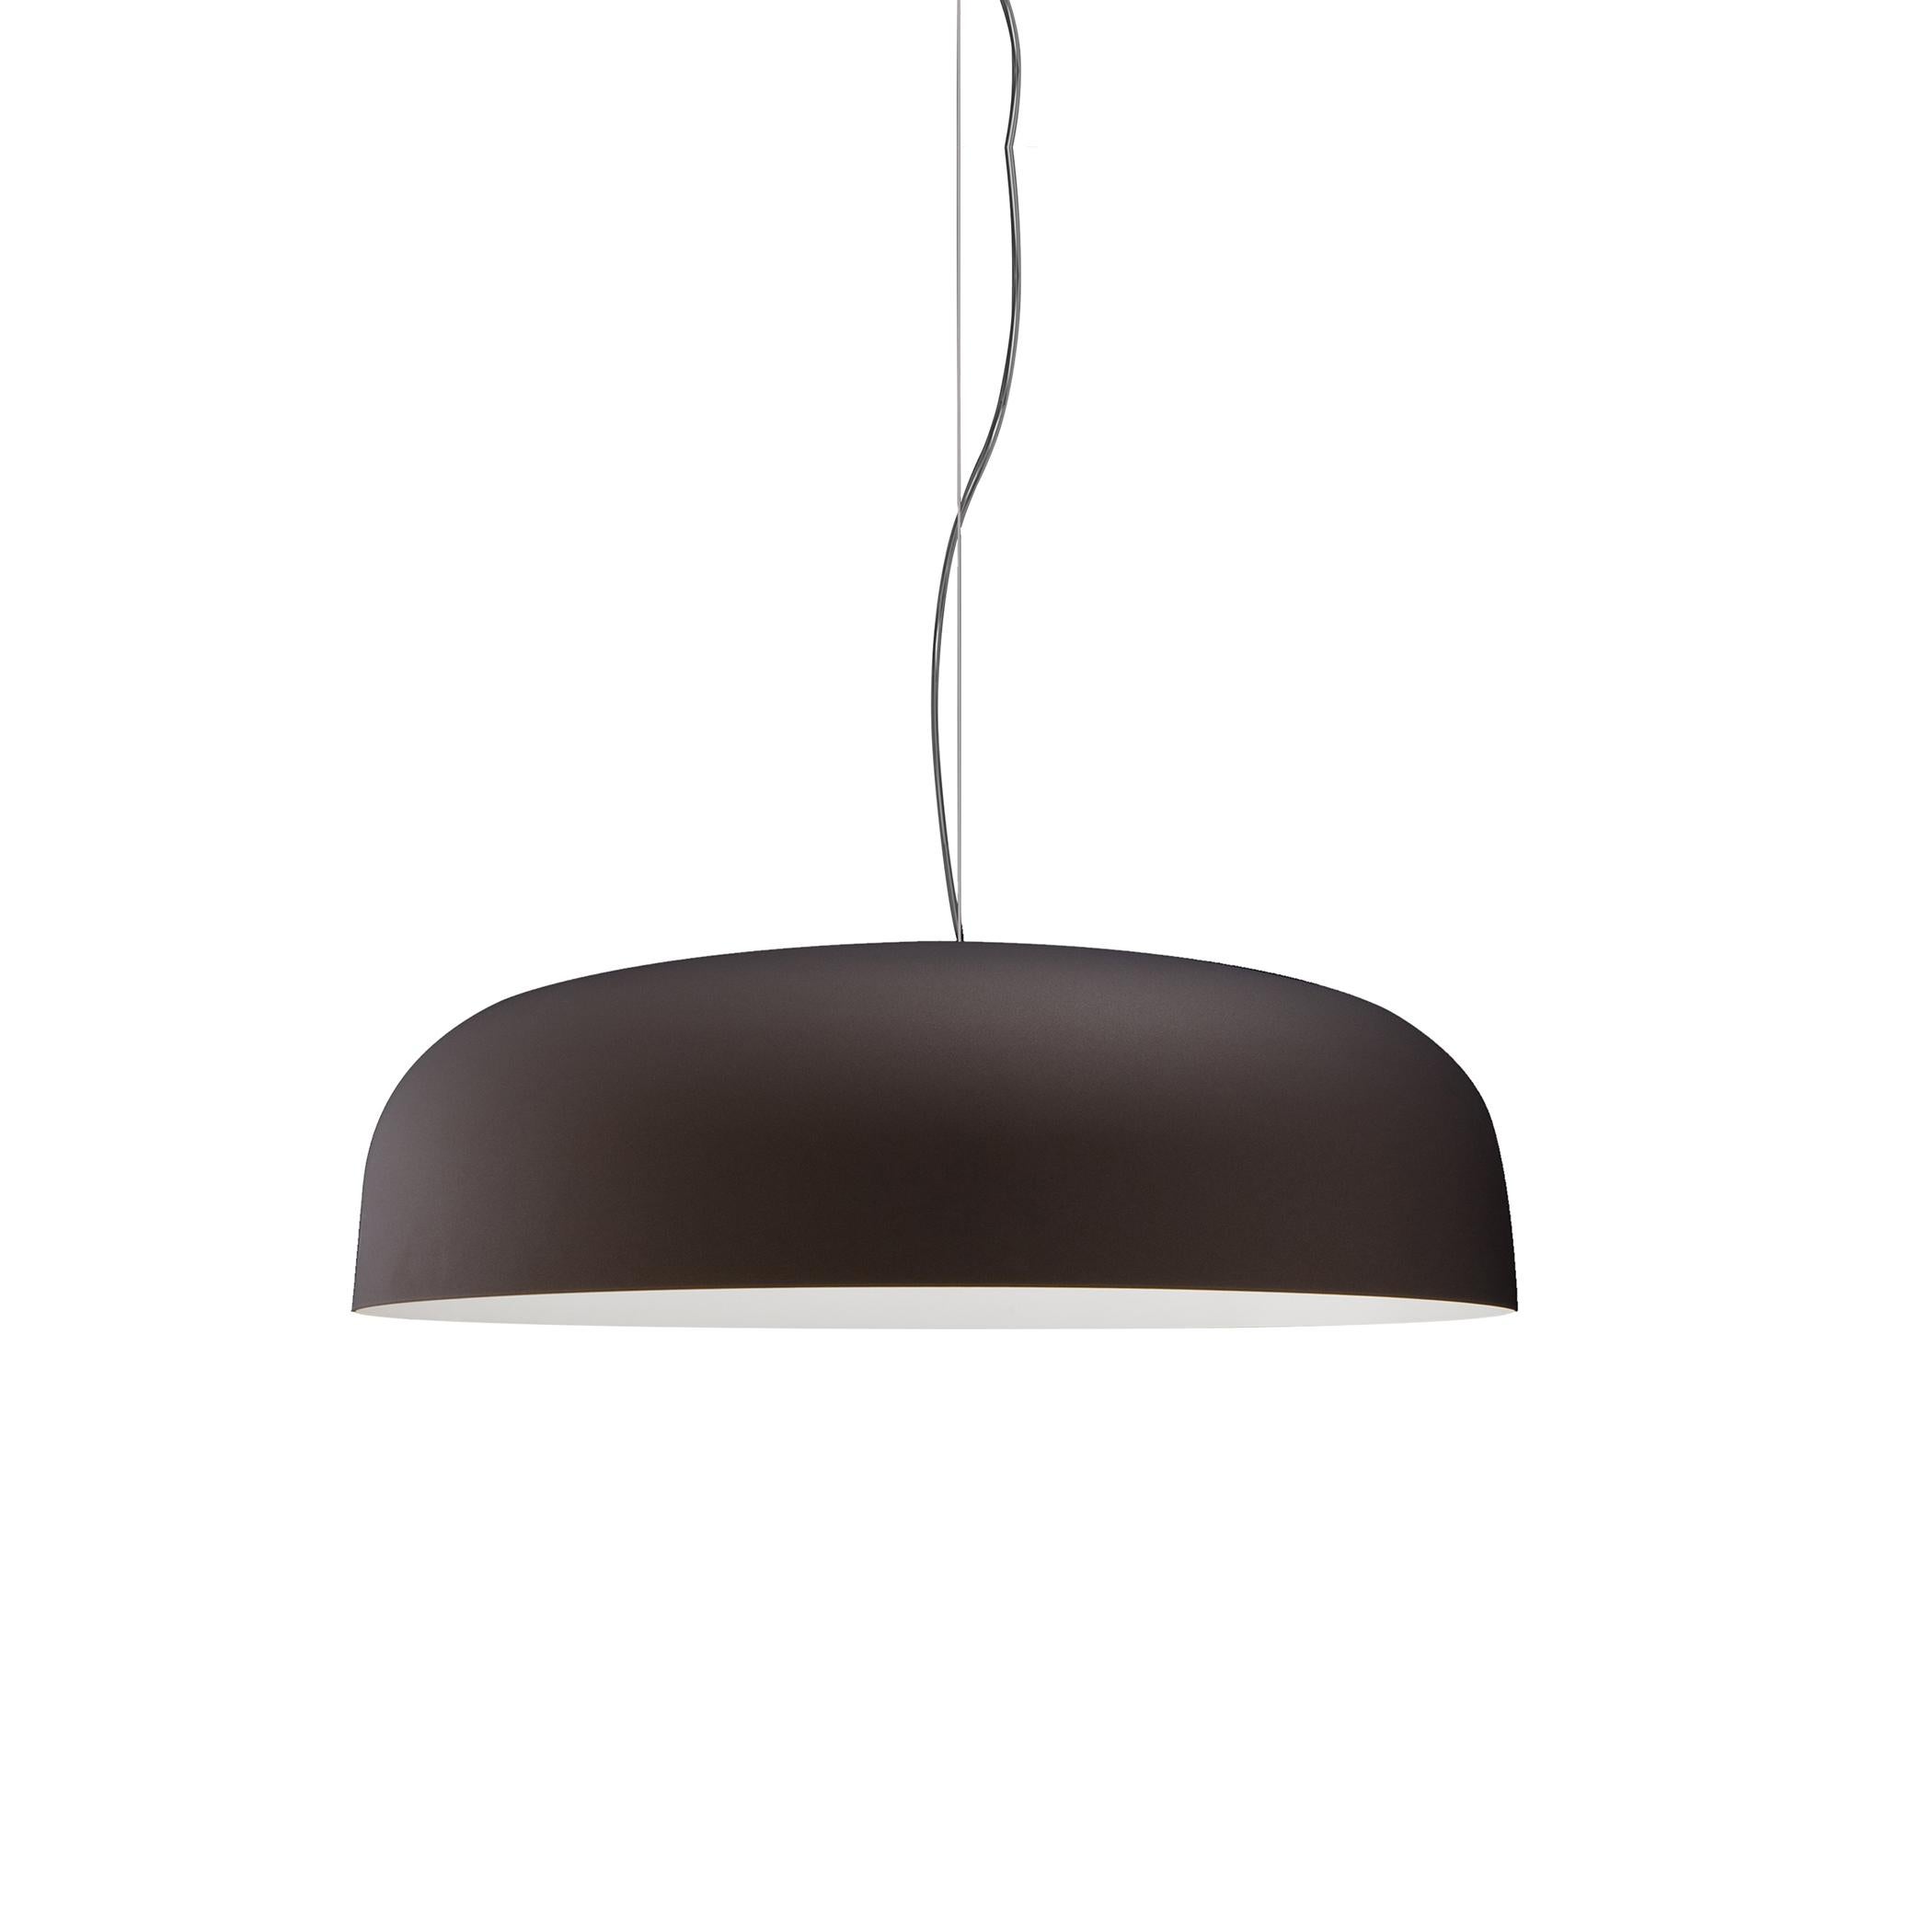 Mid-Century Modern Francesco Rota Suspension Lamp 'Canopy' 421 Bronze and White by Oluce For Sale